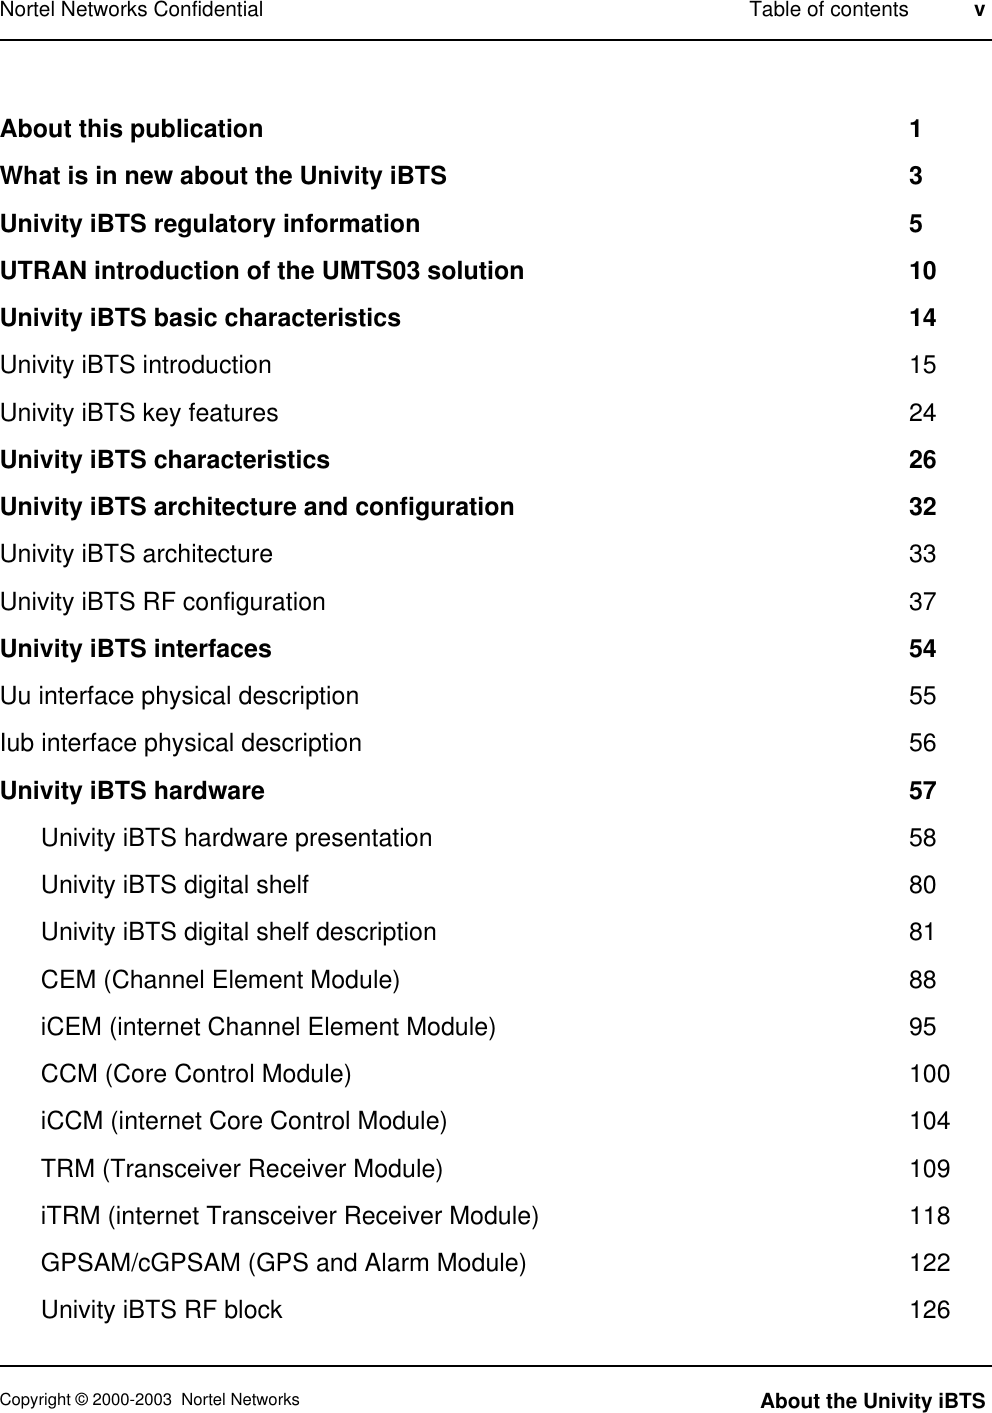 About this publication 1What is in new about the Univity iBTS 3Univity iBTS regulatory information 5UTRAN introduction of the UMTS03 solution 10Univity iBTS basic characteristics 14Univity iBTS introduction 15Univity iBTS key features 24Univity iBTS characteristics 26Univity iBTS architecture and configuration 32Univity iBTS architecture 33Univity iBTS RF configuration 37Univity iBTS interfaces 54Uu interface physical description 55Iub interface physical description 56Univity iBTS hardware 57Univity iBTS hardware presentation 58Univity iBTS digital shelf 80Univity iBTS digital shelf description 81CEM (Channel Element Module) 88iCEM (internet Channel Element Module) 95CCM (Core Control Module) 100iCCM (internet Core Control Module) 104TRM (Transceiver Receiver Module) 109iTRM (internet Transceiver Receiver Module) 118GPSAM/cGPSAM (GPS and Alarm Module) 122Univity iBTS RF block 126Nortel Networks Confidential Table of contents vCopyright © 2000-2003 Nortel Networks About the Univity iBTS